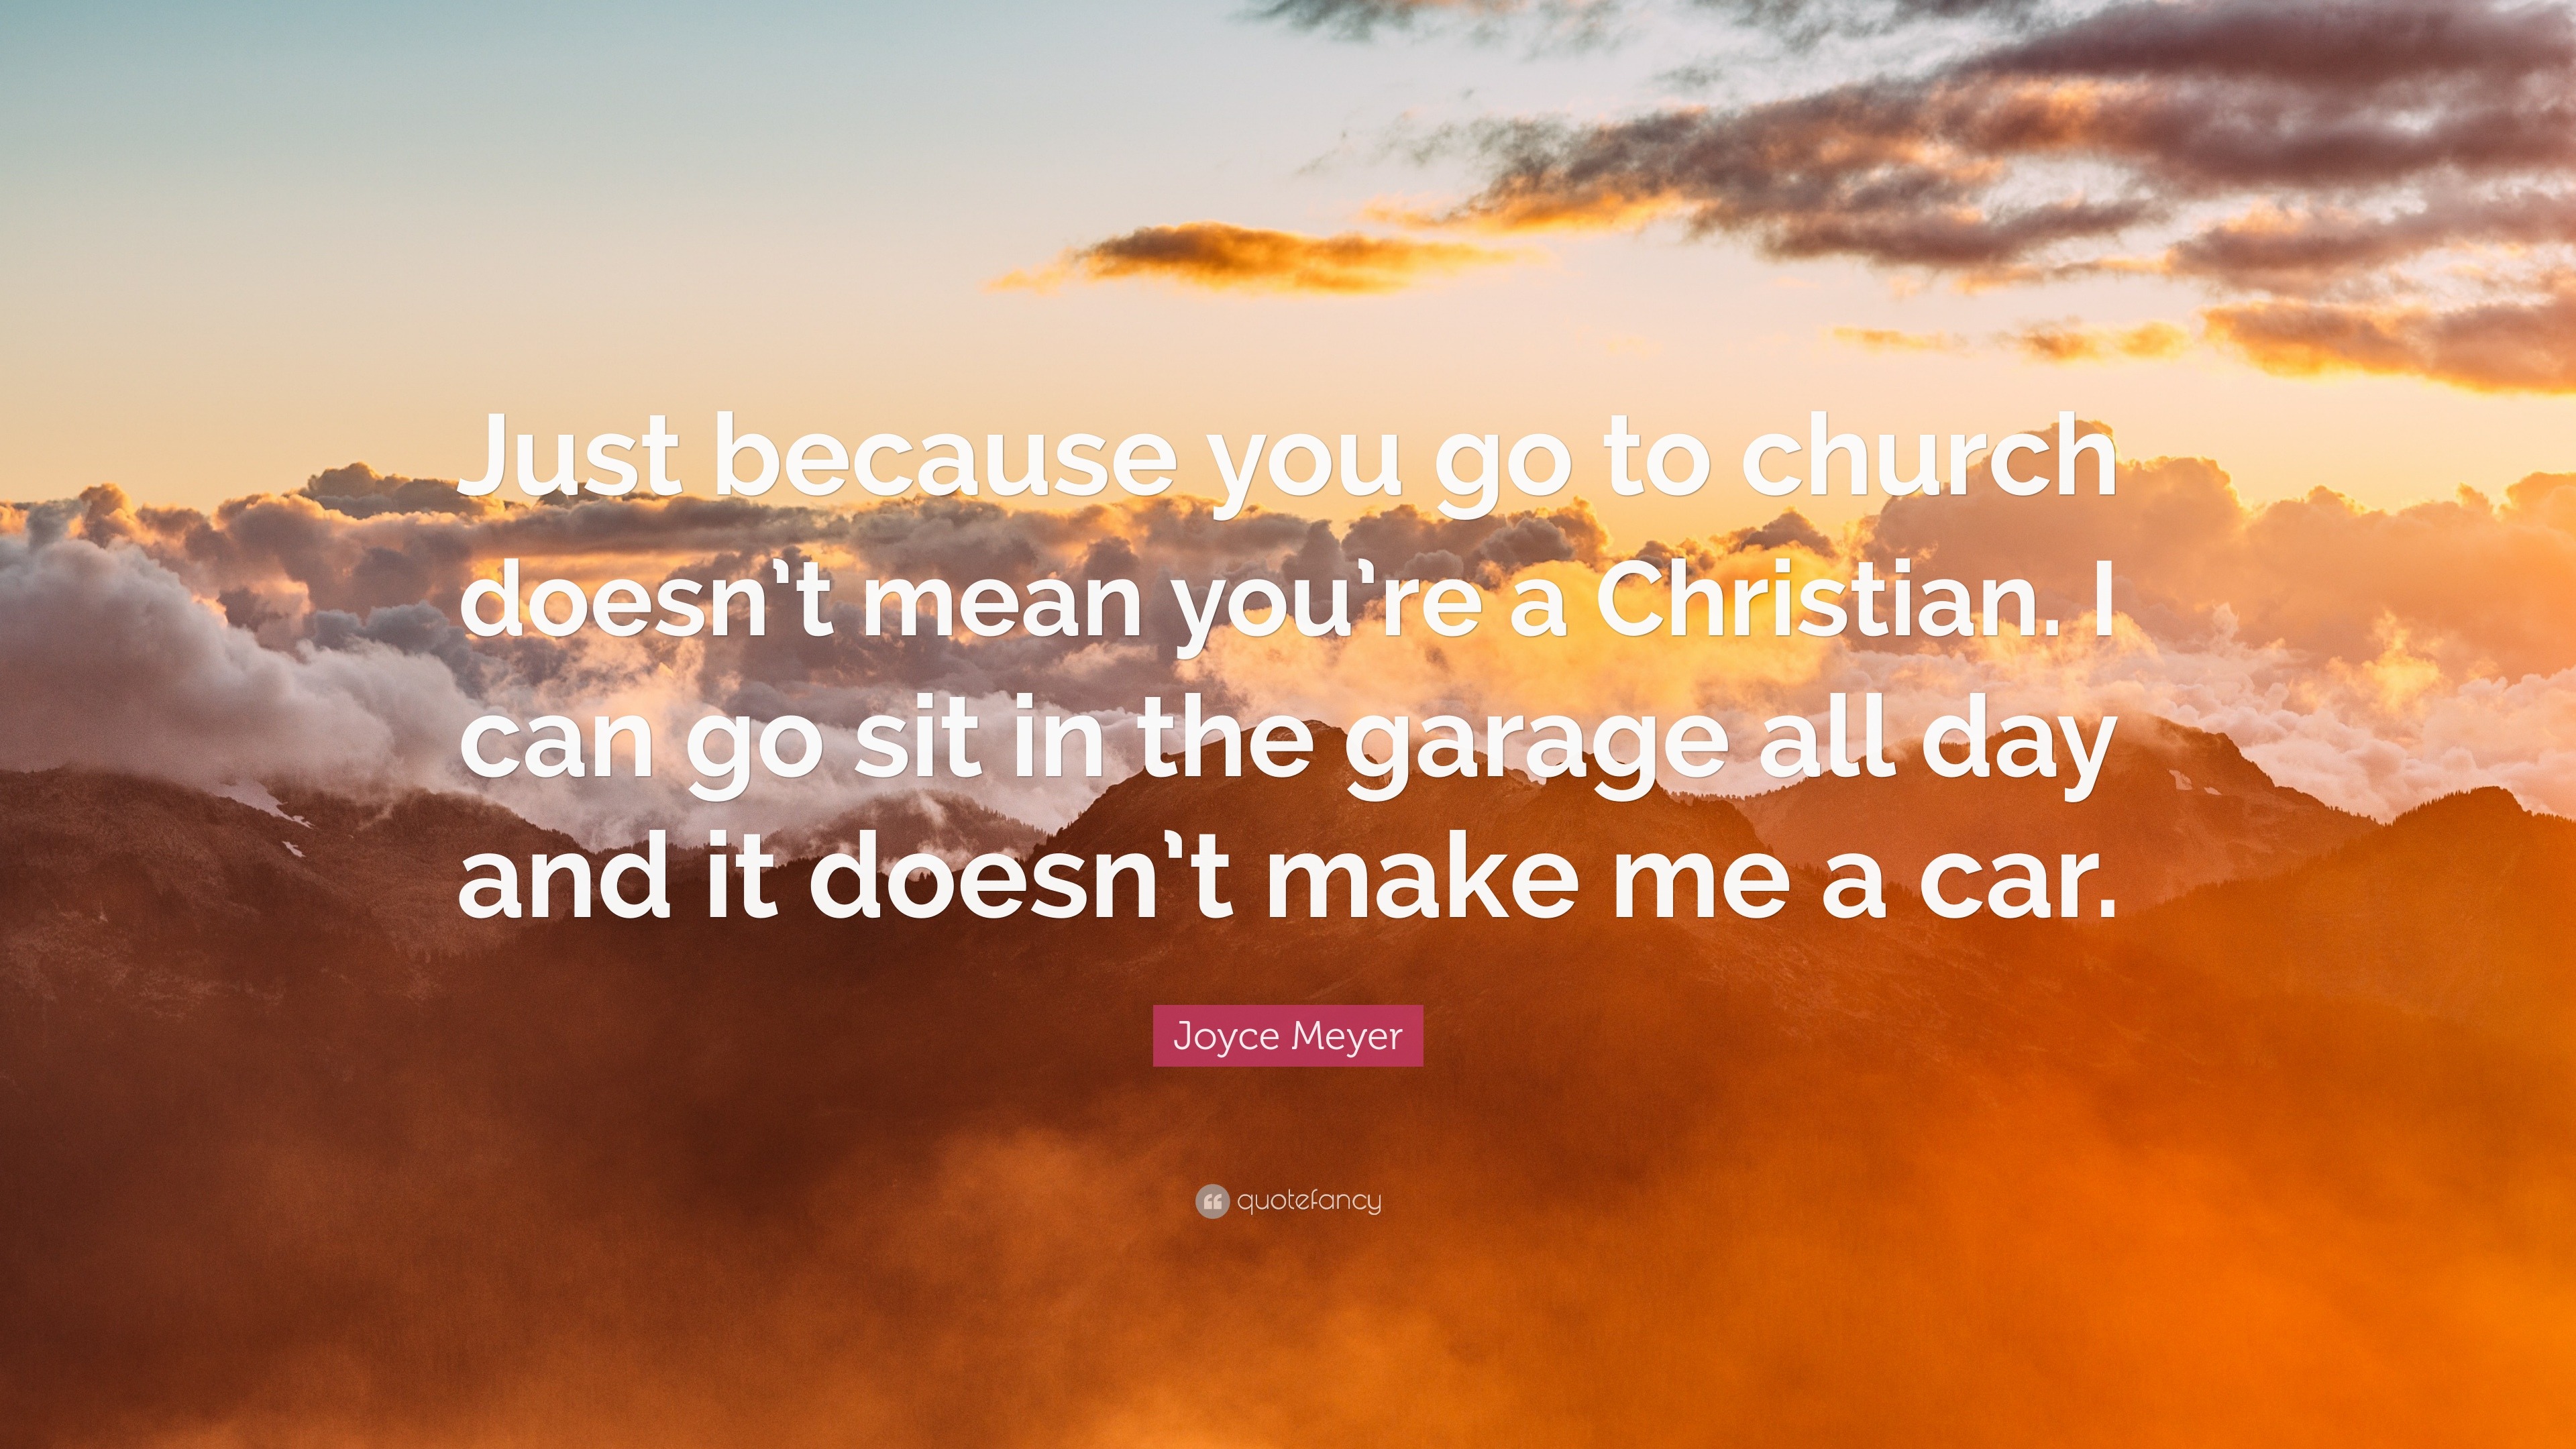 Joyce Meyer Quote Just Because You Go To Church Doesn T Mean You Re A Christian I Can Go Sit In The Garage All Day And It Doesn T Make Me 12 Wallpapers Quotefancy